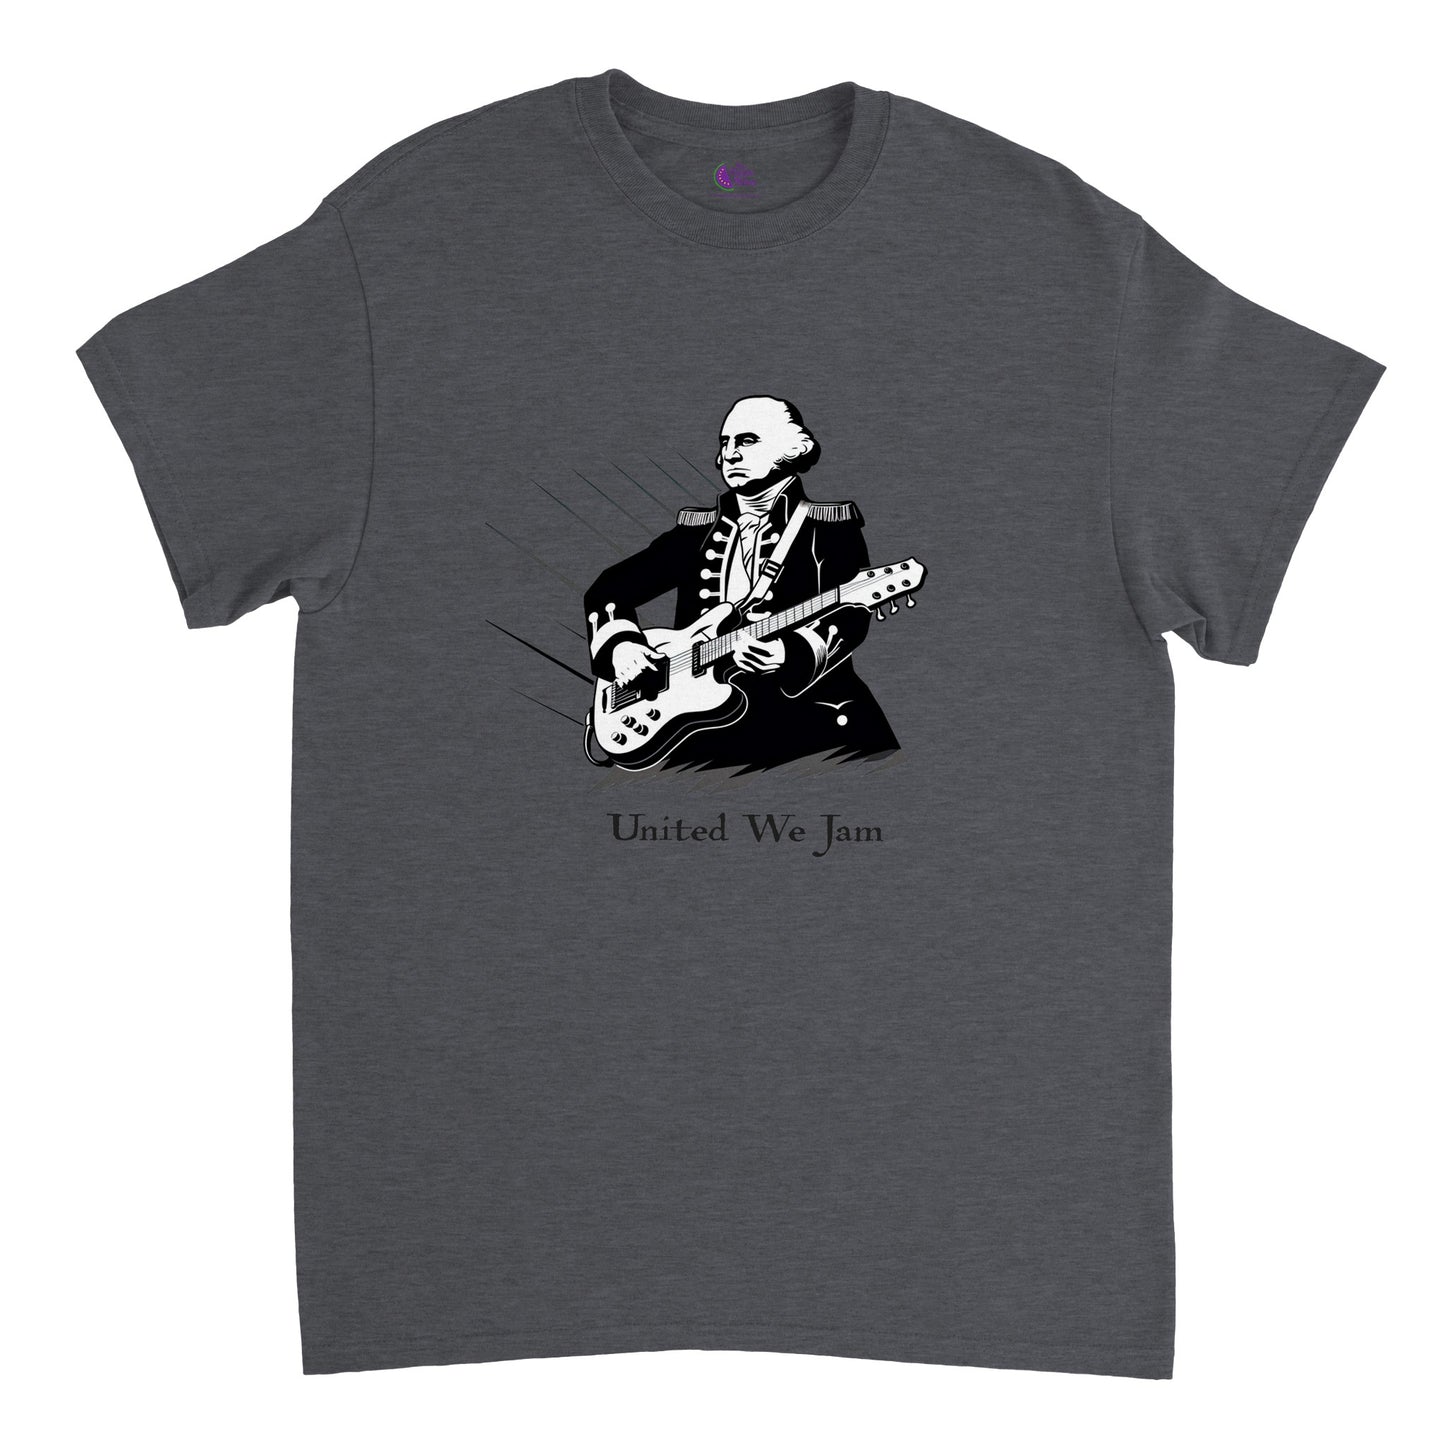 dark heather t-shirt with print of George Washington playing the guitar and the caption United We Jam